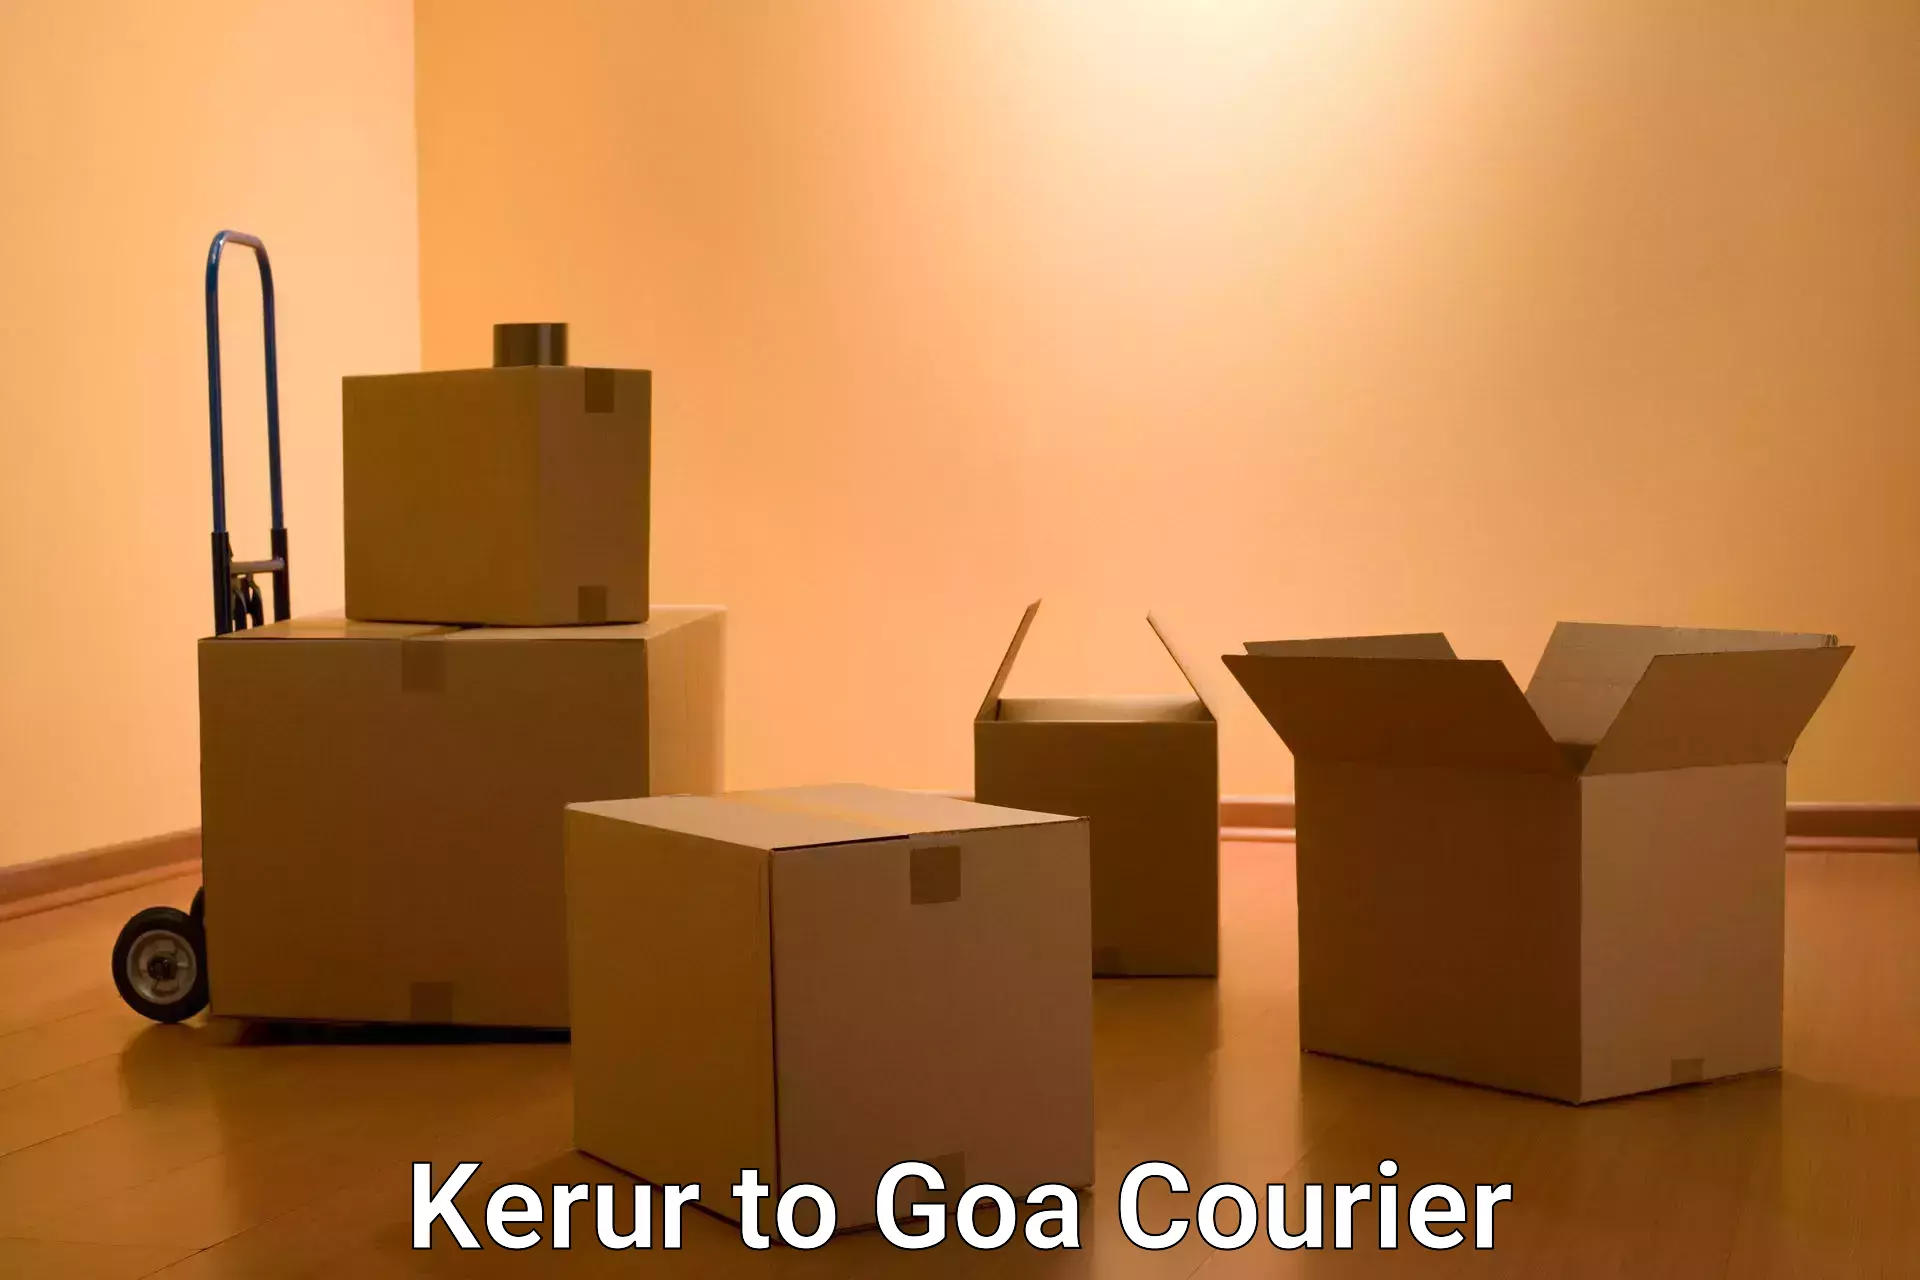 End-to-end delivery Kerur to Panaji